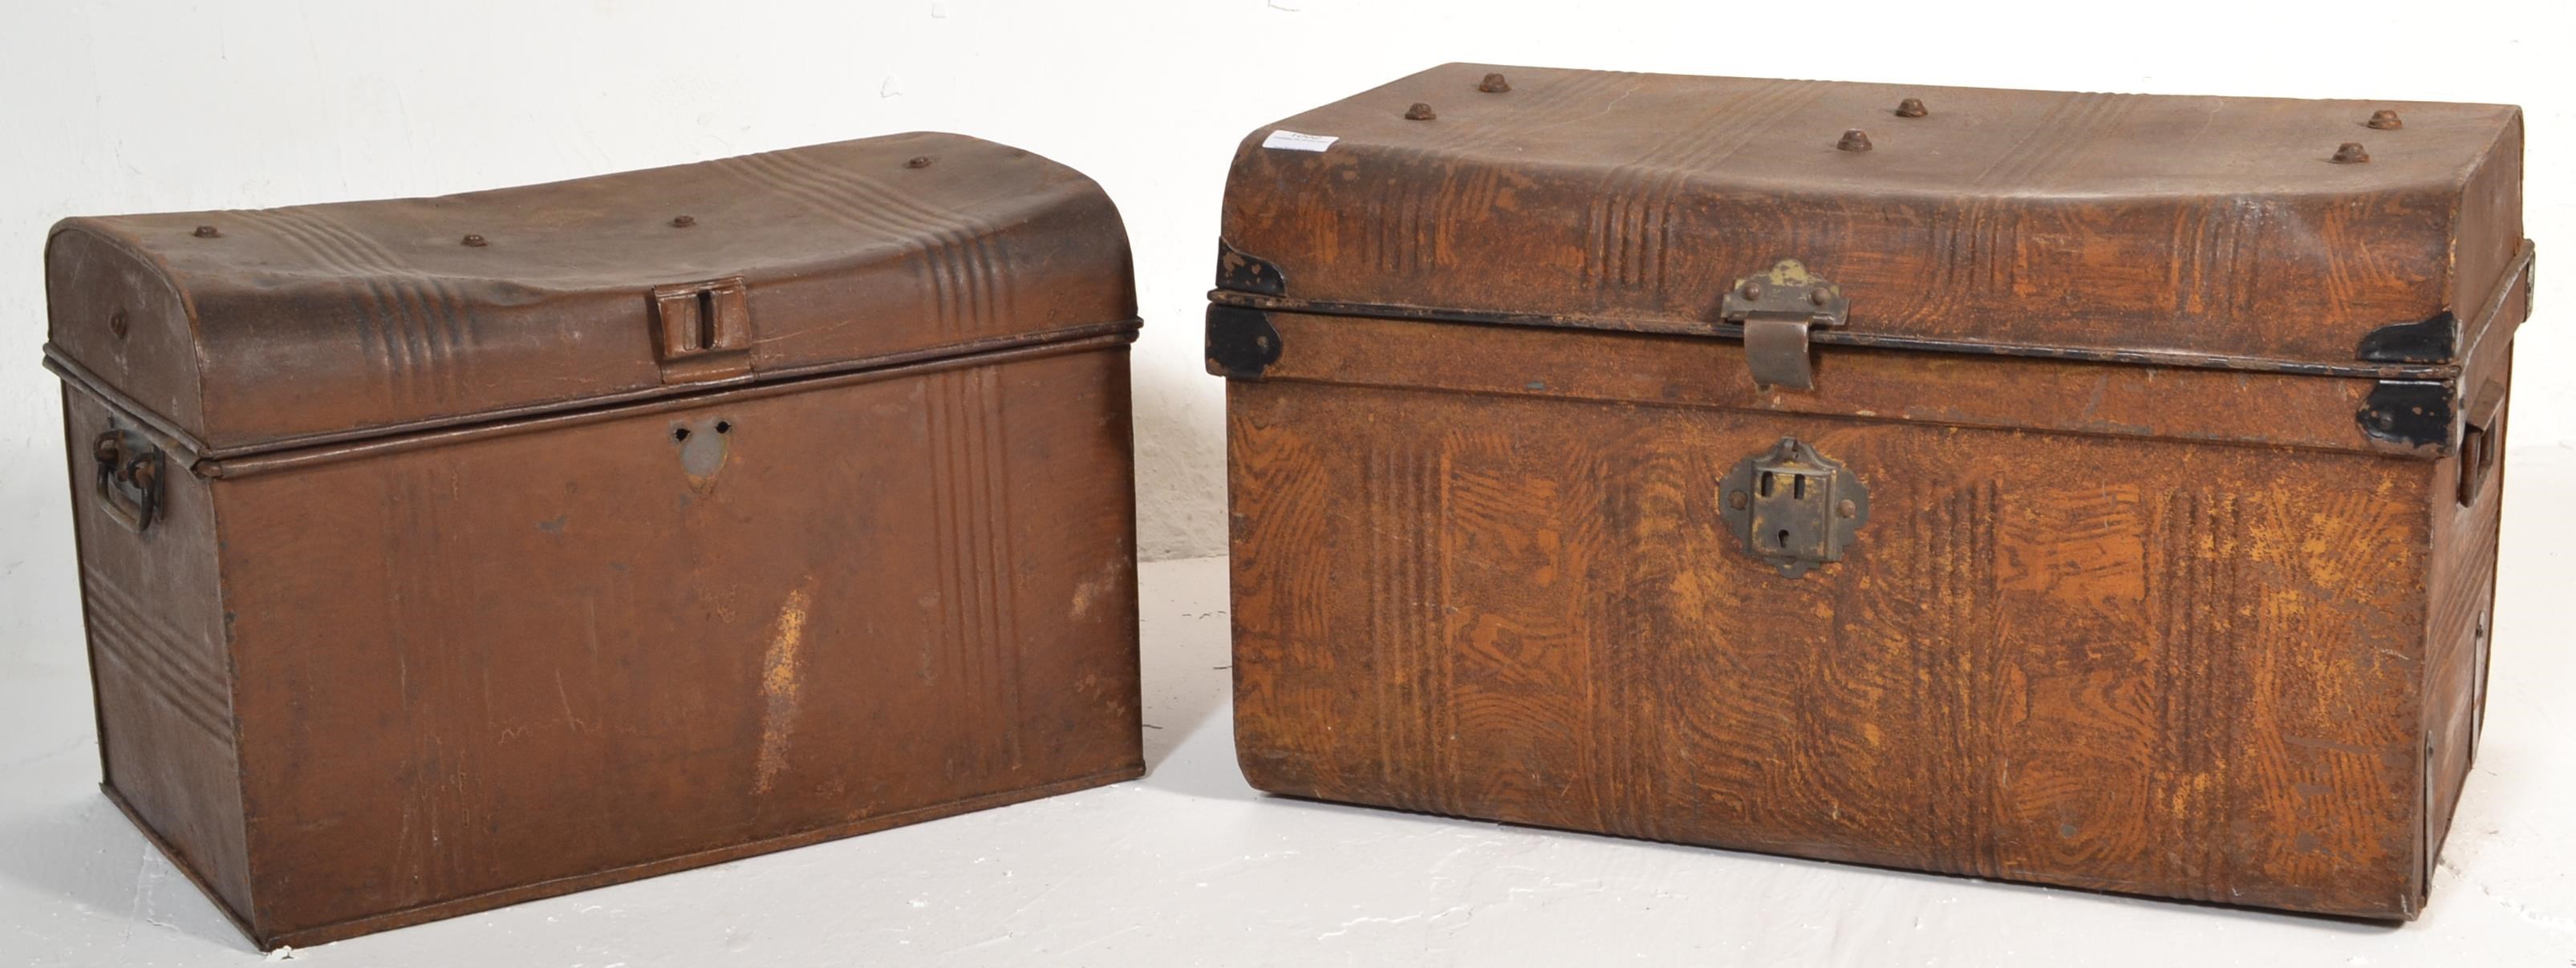 A Victorian 19th century metal tin trunk of shaped